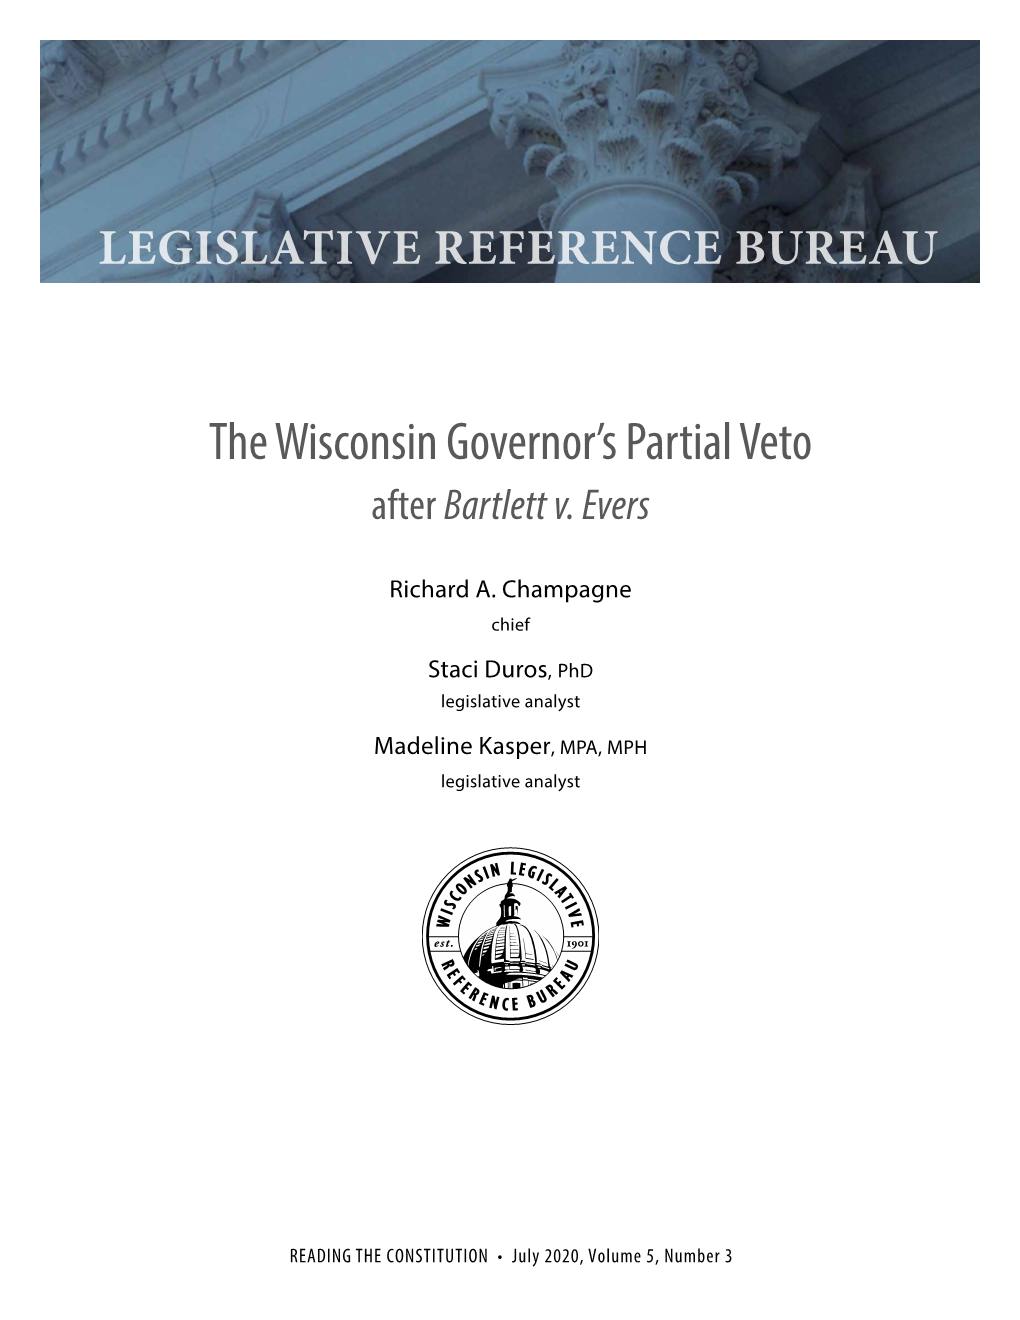 The Wisconsin Governor's Partial Veto After Bartlett V. Evers